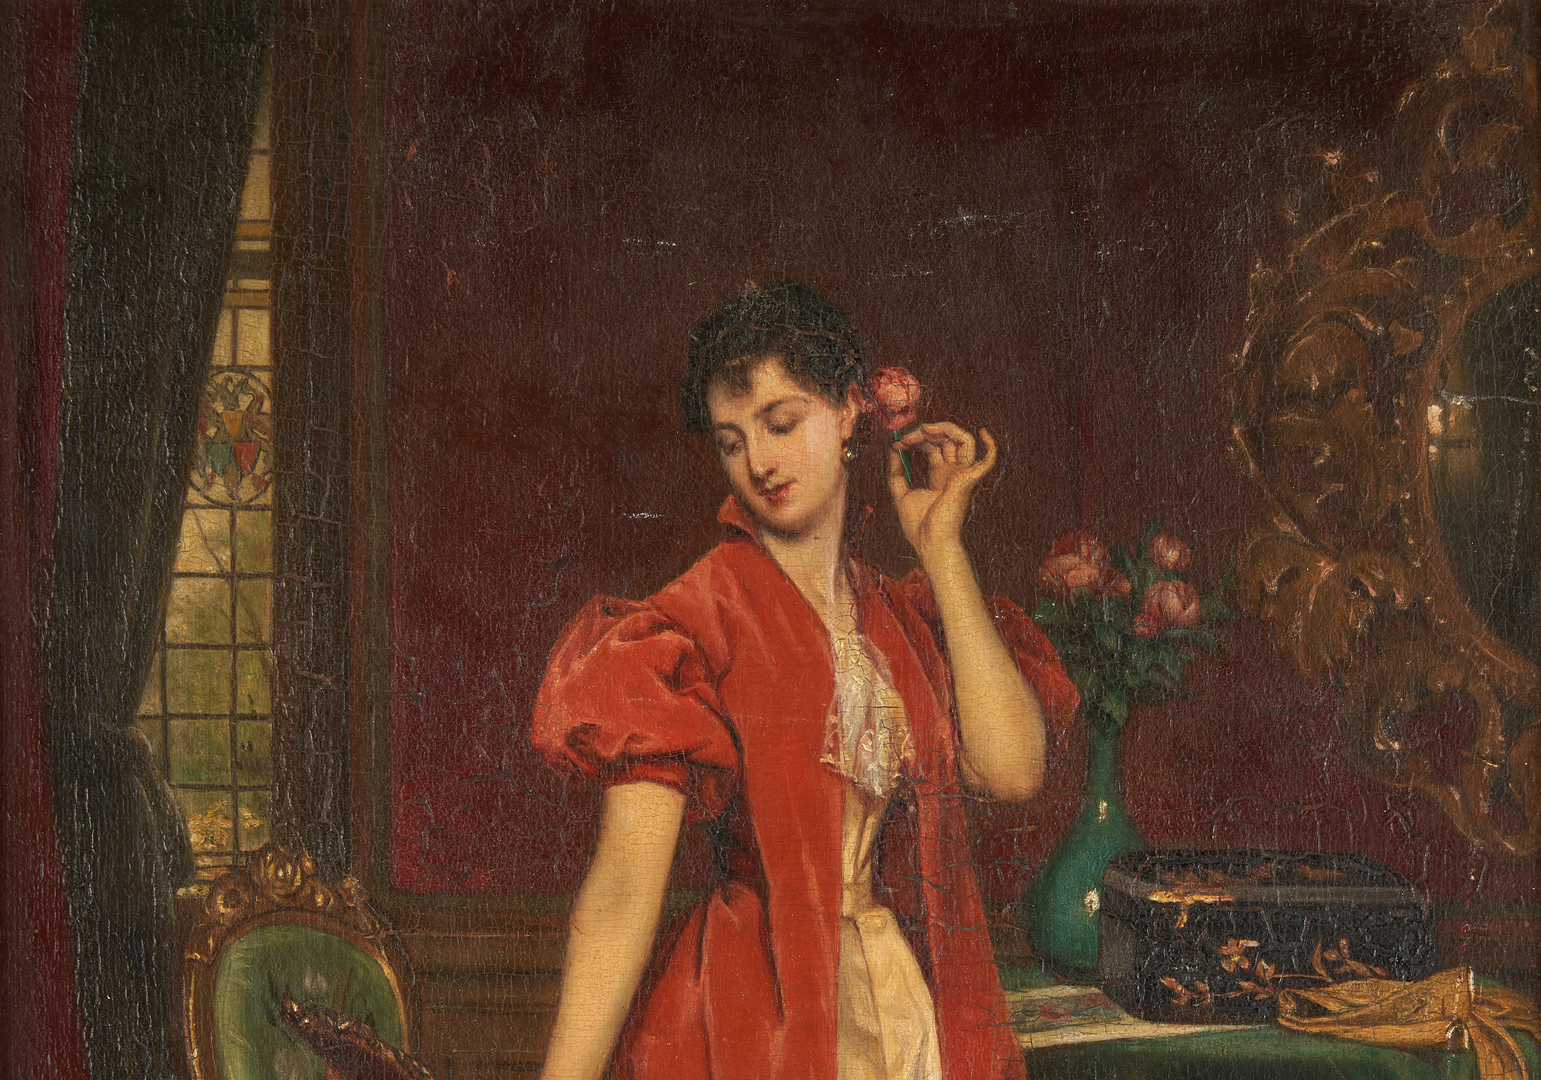 Lot 379: Attr. Louis Tannert O/P, Young Woman with Mirror